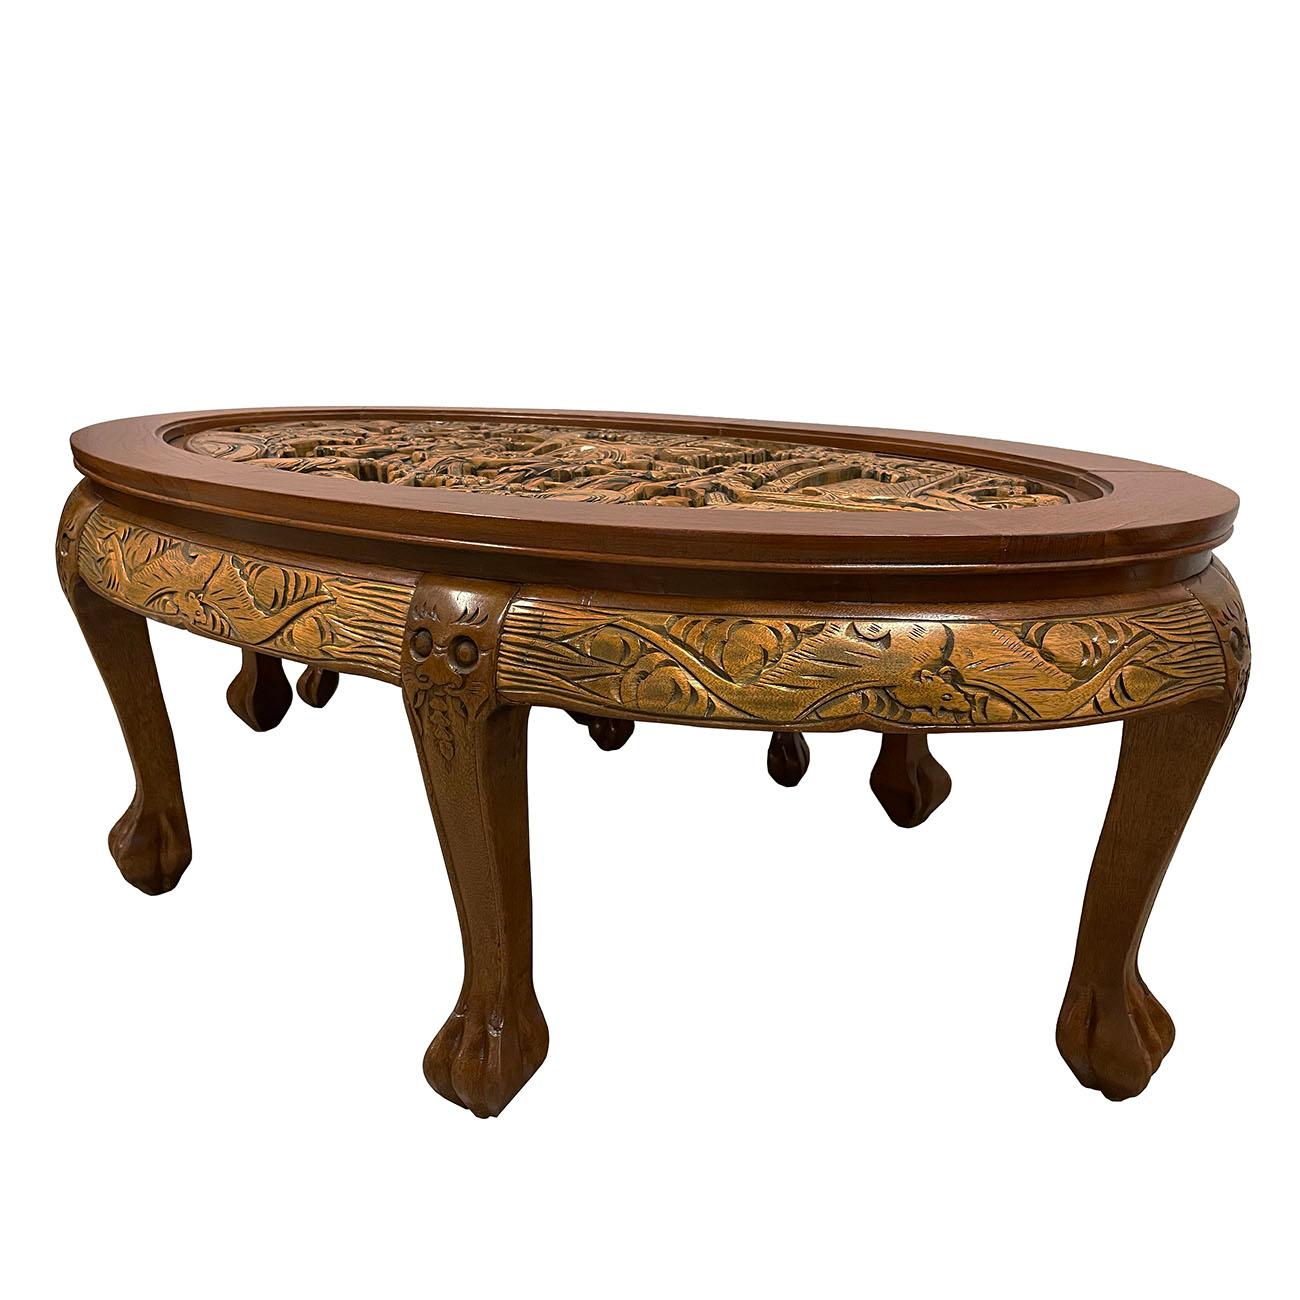 This beautiful carved coffee table from the early 1900s is made from solid Teak wood and showcases the beautiful details of Chinese traditional massive carving works of Chinese beauties on top surface and protected by a custom made glass cover.